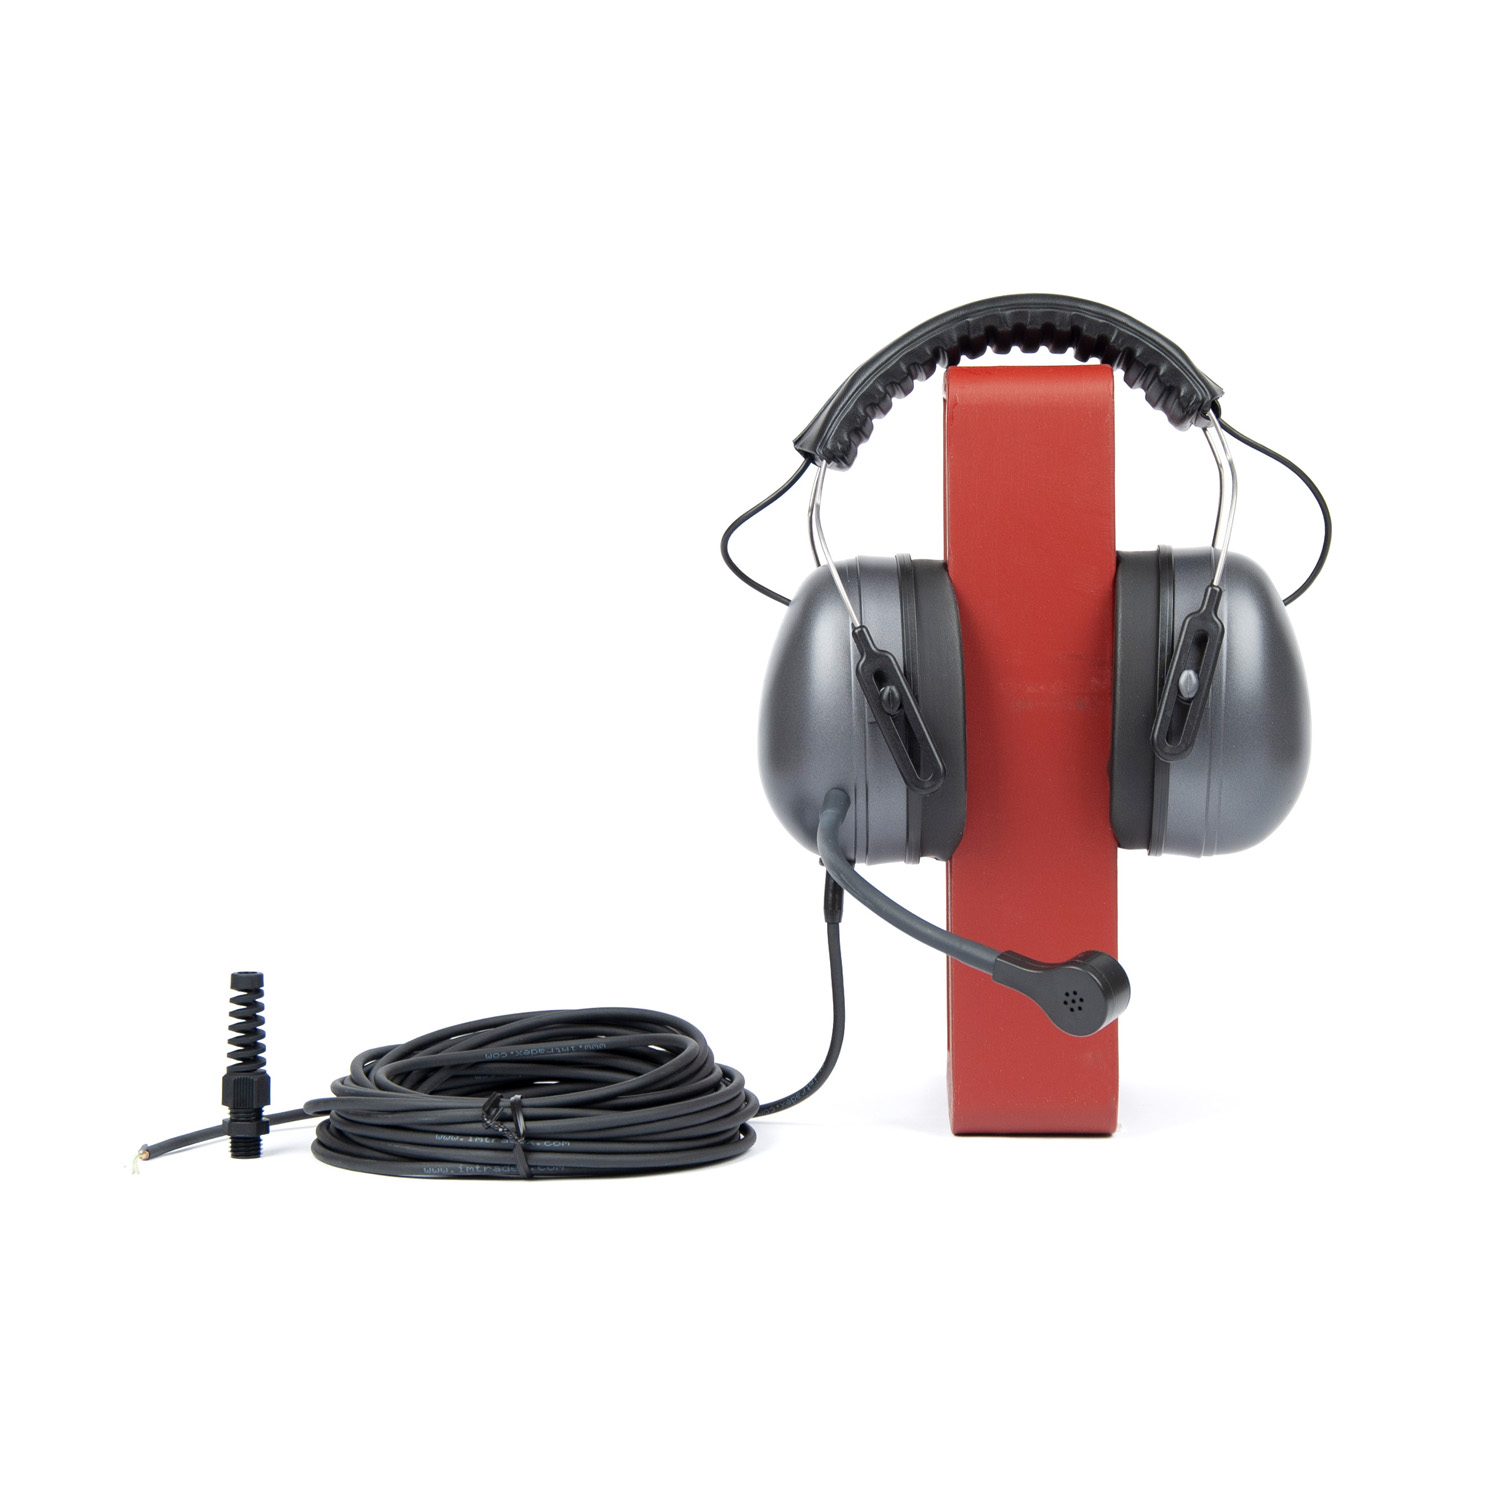 STC-606-20 Headset with 20 mtr. cable for STC-306